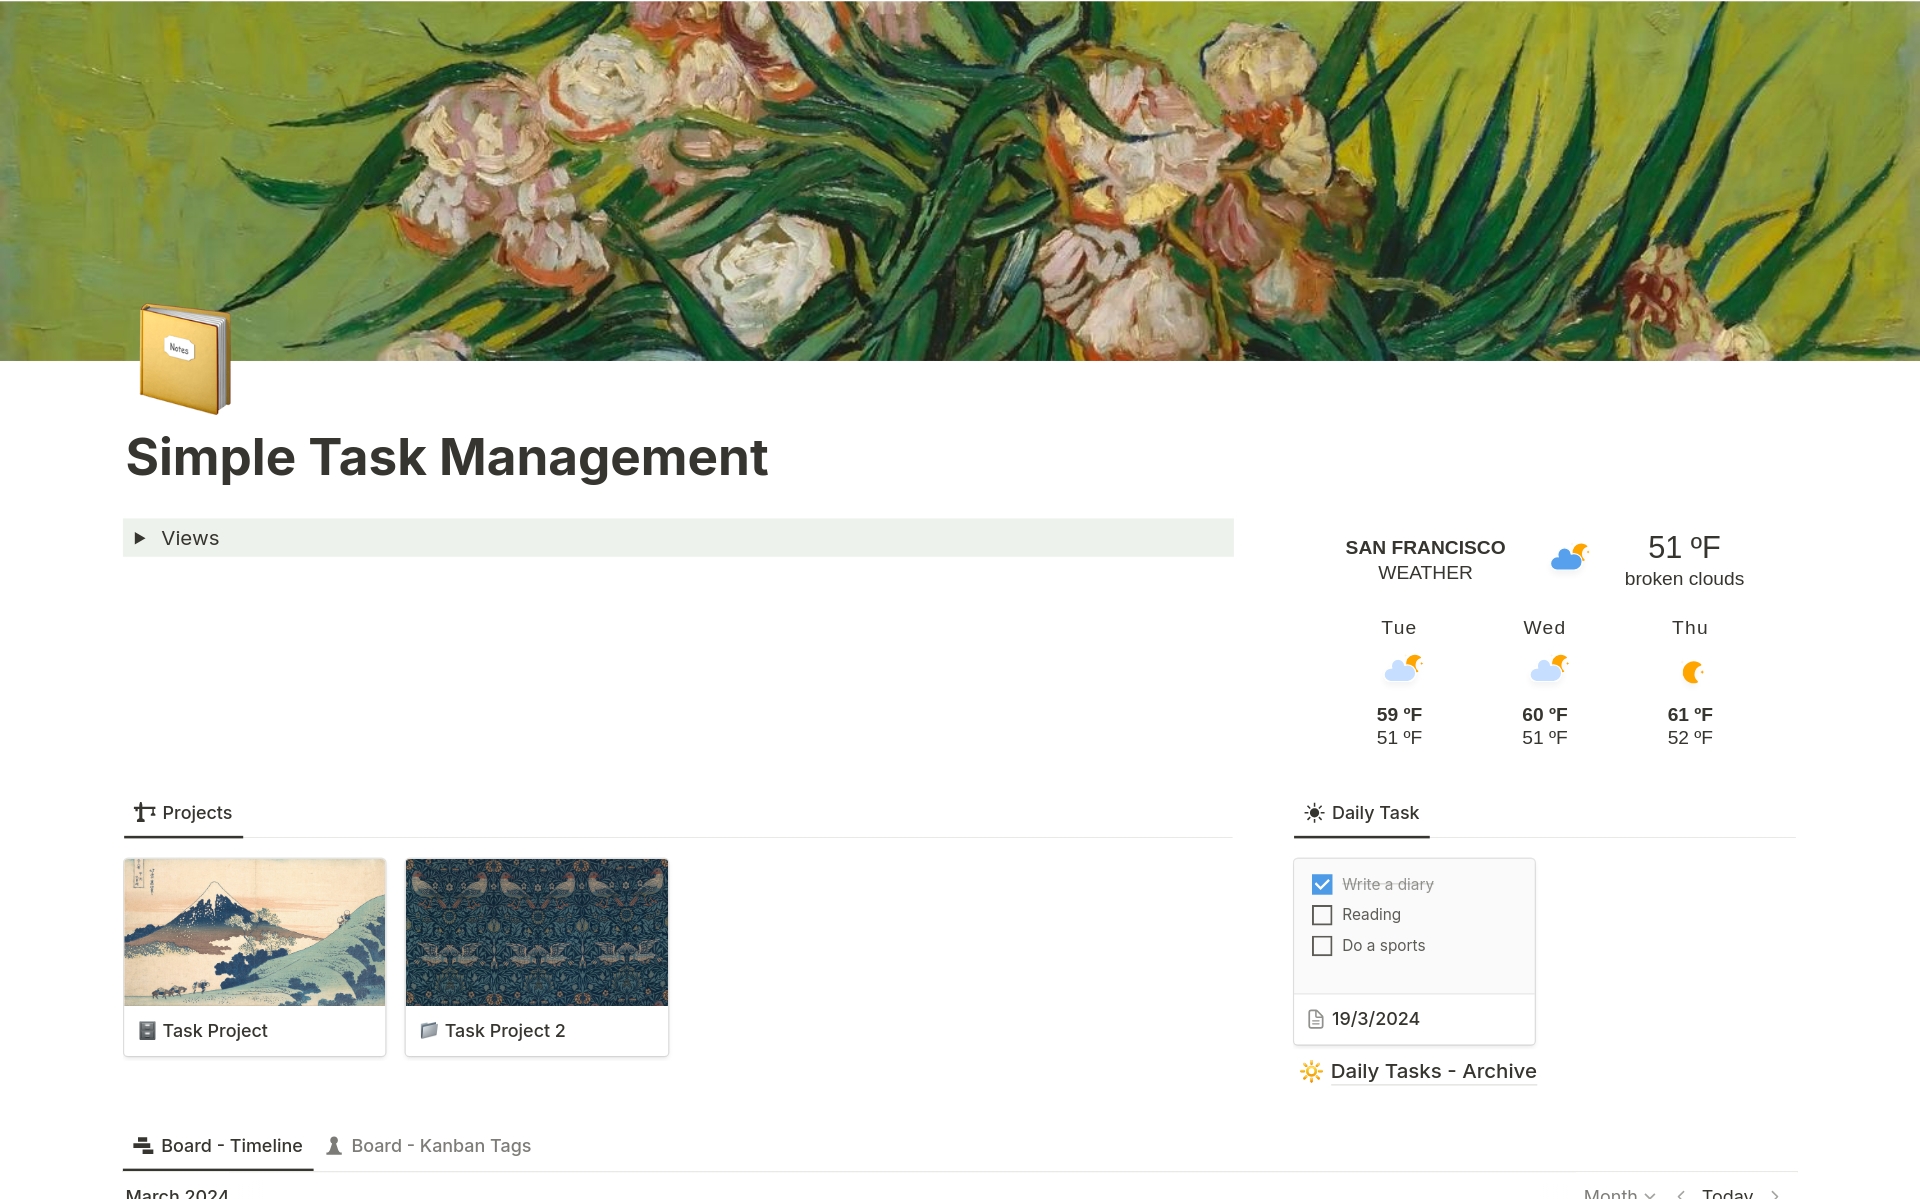 This is a simple task management template.